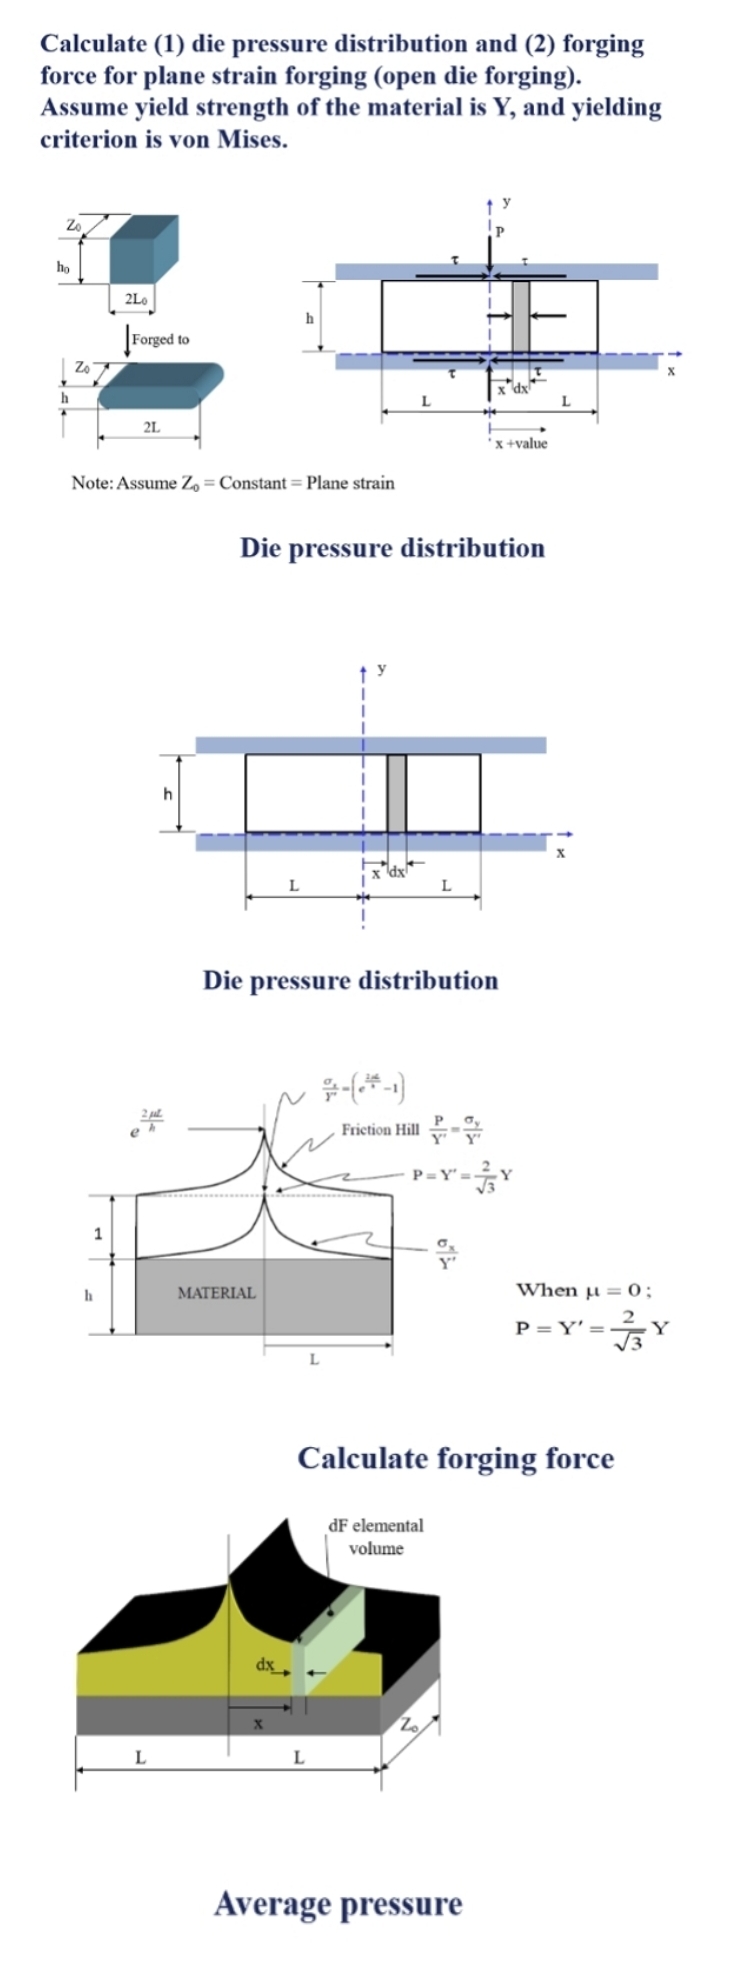 Calculate (1) die pressure distribution and (2) forging
force for plane strain forging (open die forging).
Assume yield strength of the material is Y, and yielding
criterion is von Mises.
ho
2Lo
h
Forged to
2L
xdx
L
'x+value
Note: Assume Zo Constant Plane strain
Die pressure distribution
h
L
L
Die pressure distribution
h
MATERIAL
L
dx
-(-1)
Friction Hill
Y
L
When 0;
=Y
P=Y' =
Calculate forging force
X
L
dF elemental
volume
Average pressure